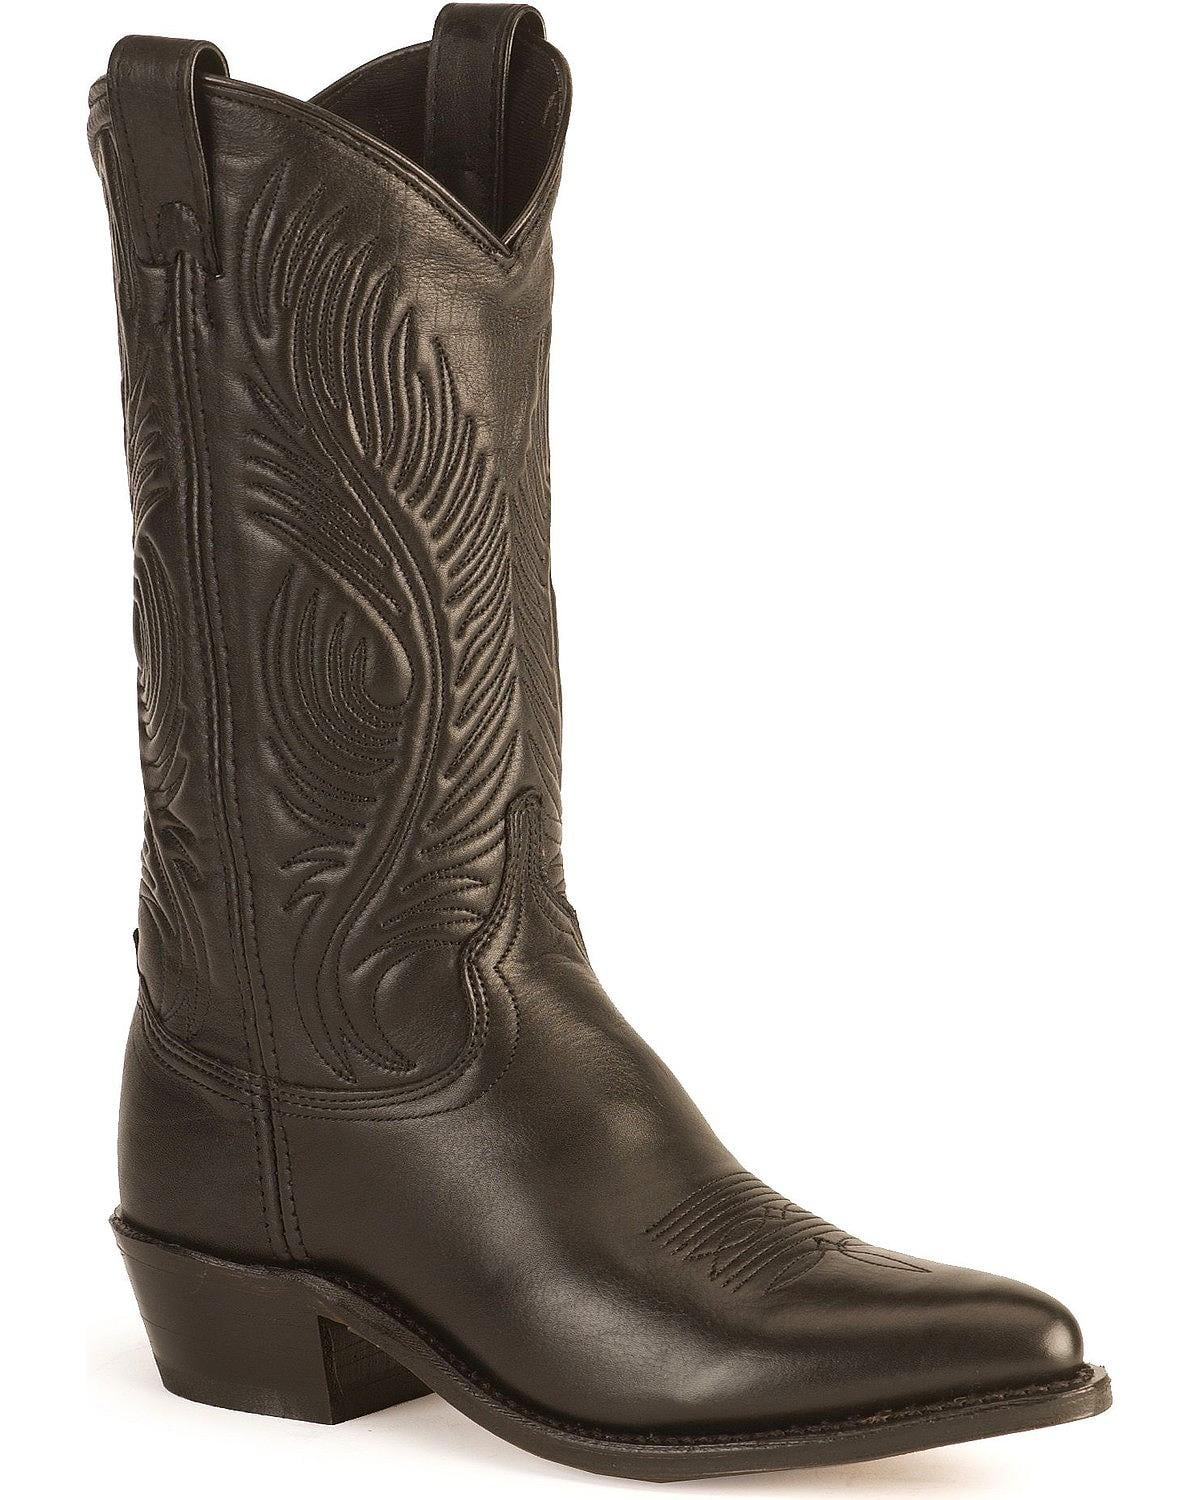 cowhide cowgirl boots